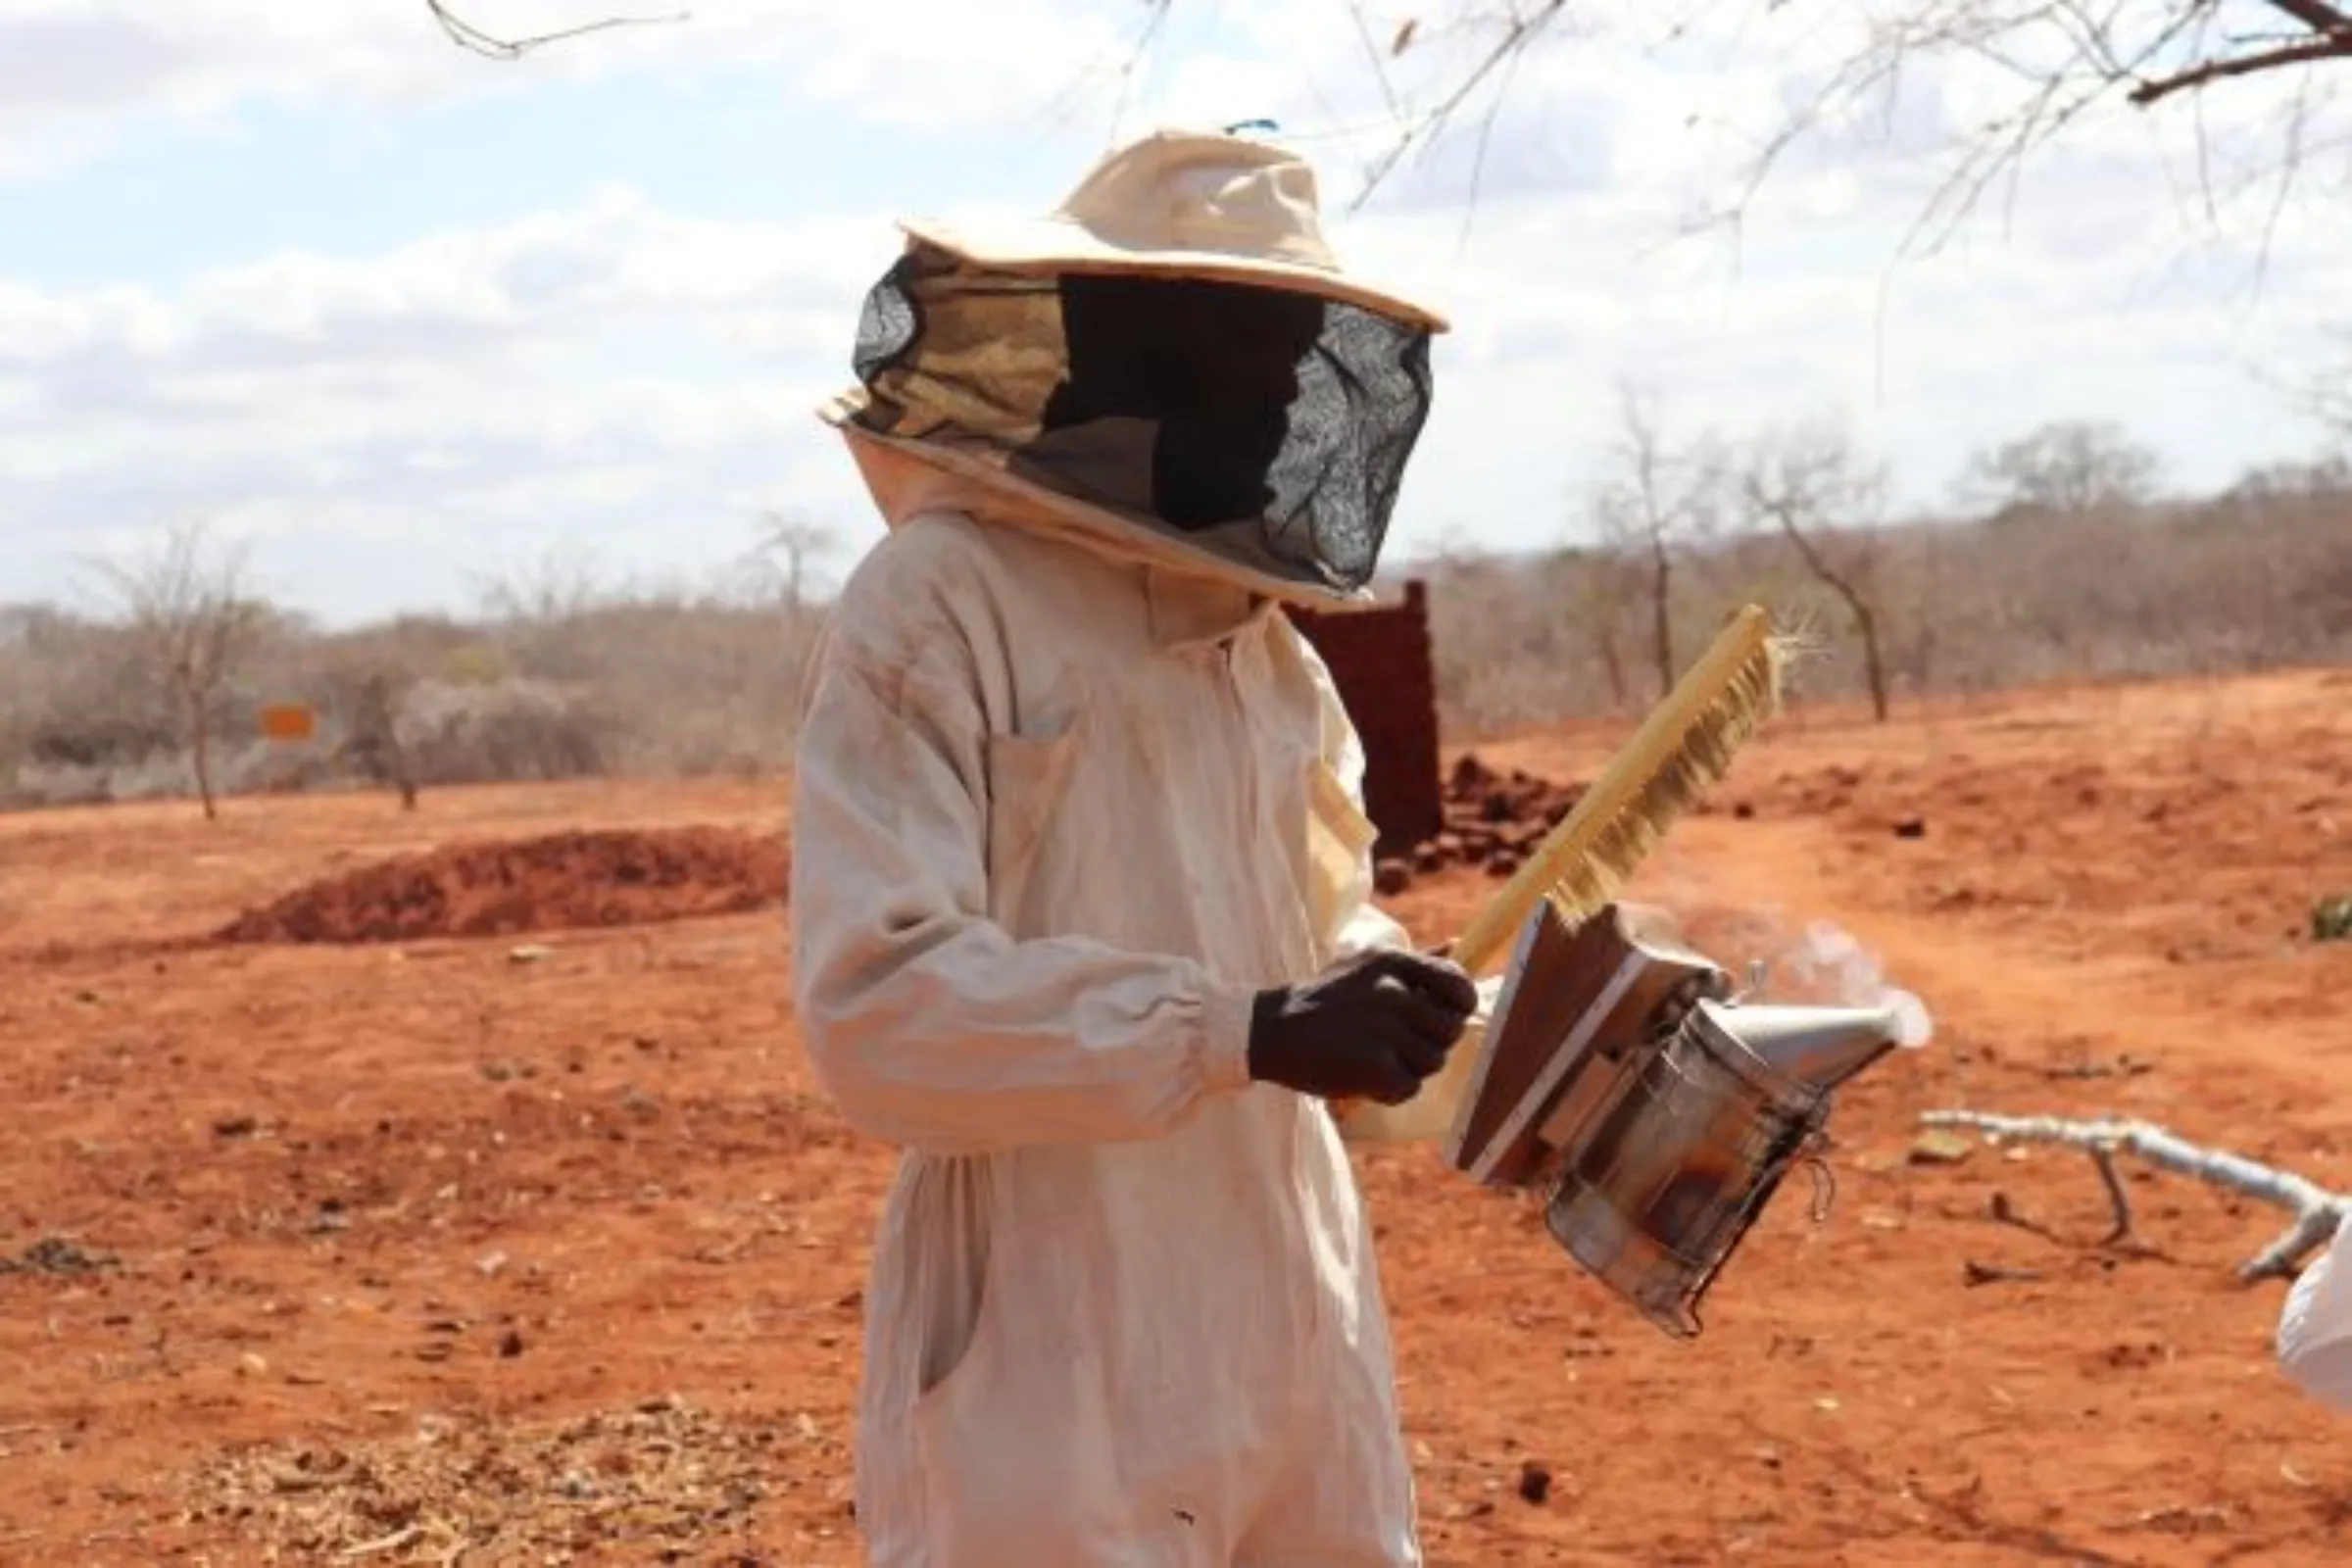 A farmer demonstrates how to use smoke when harvesting honey from beehives in Mware village, Kenya, October 13, 2022. Thomson Reuters Foundation/Dominic Kirui